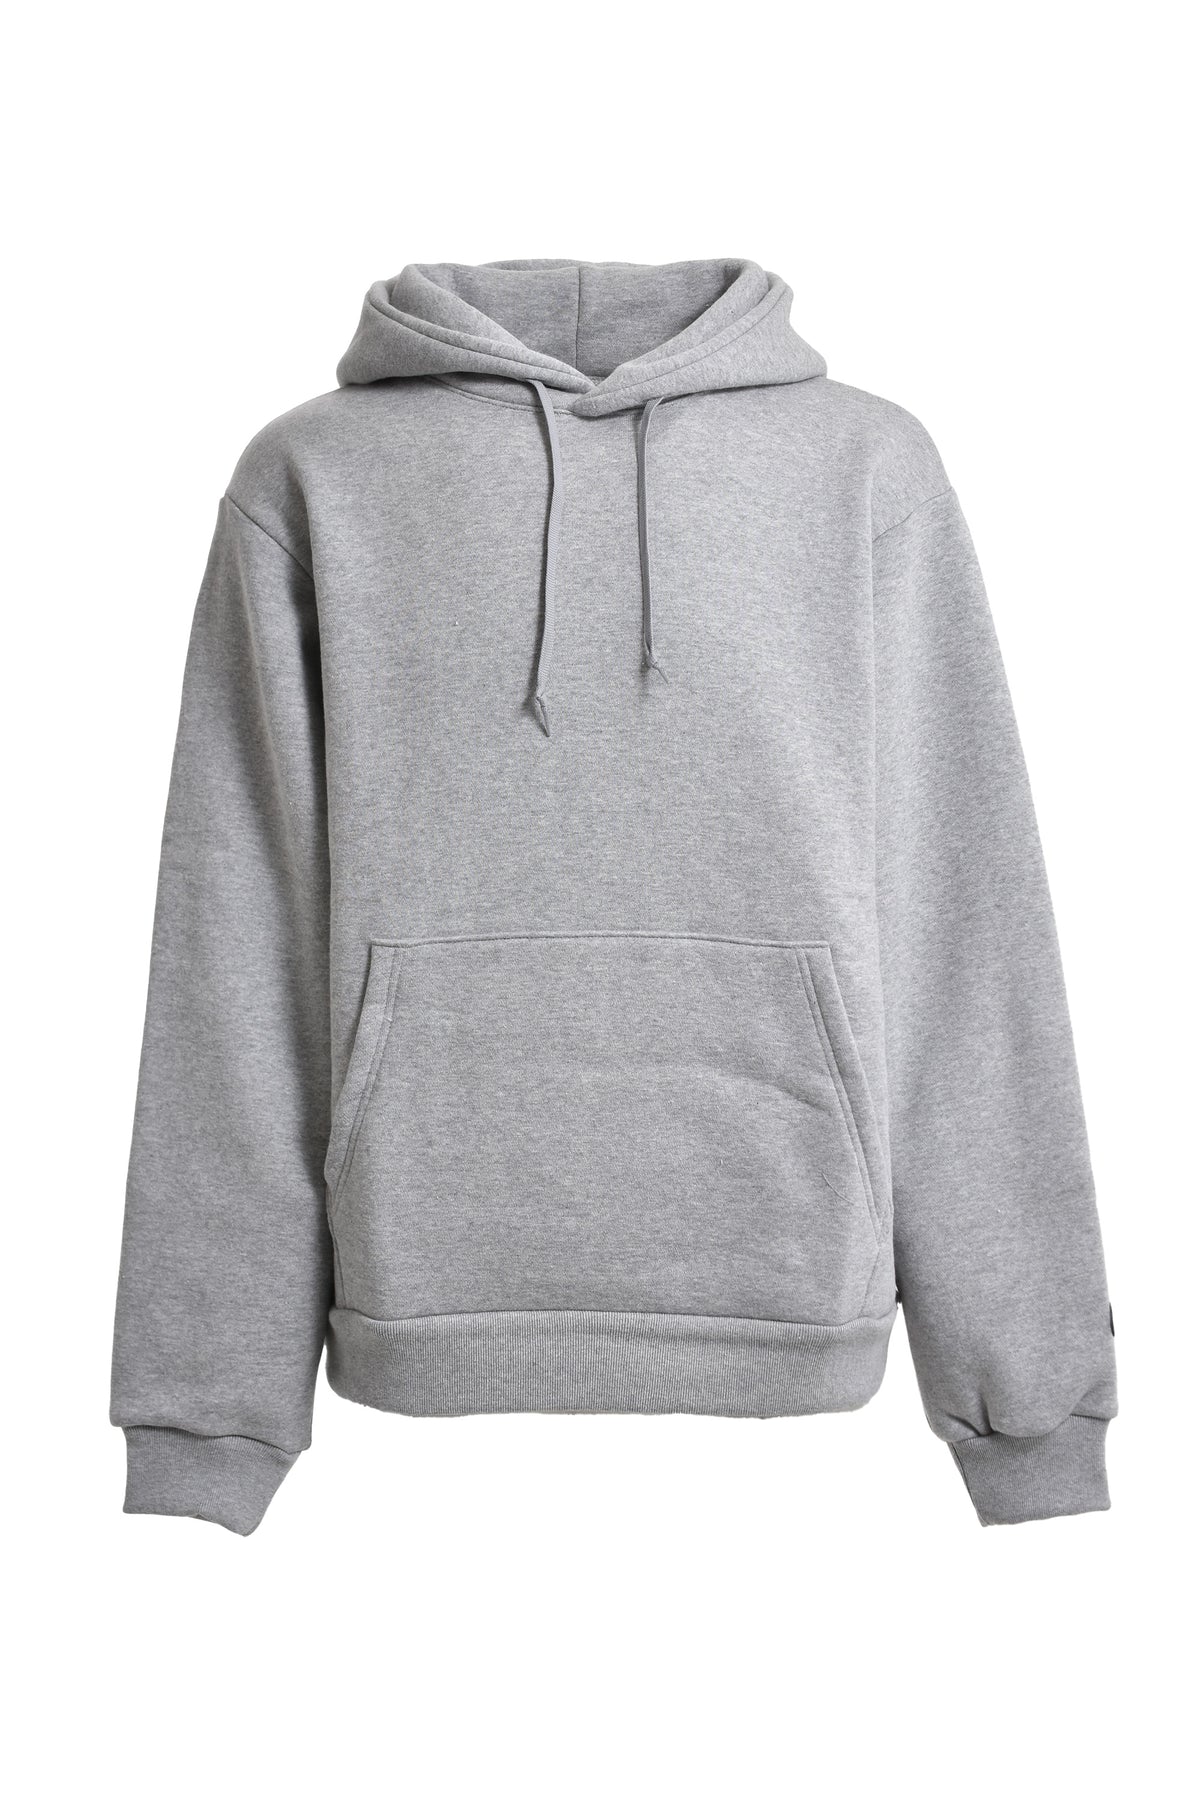 MOUT RECON TAILOR CONFIDENTIAL RENCH TERRY HOODIE / GRY